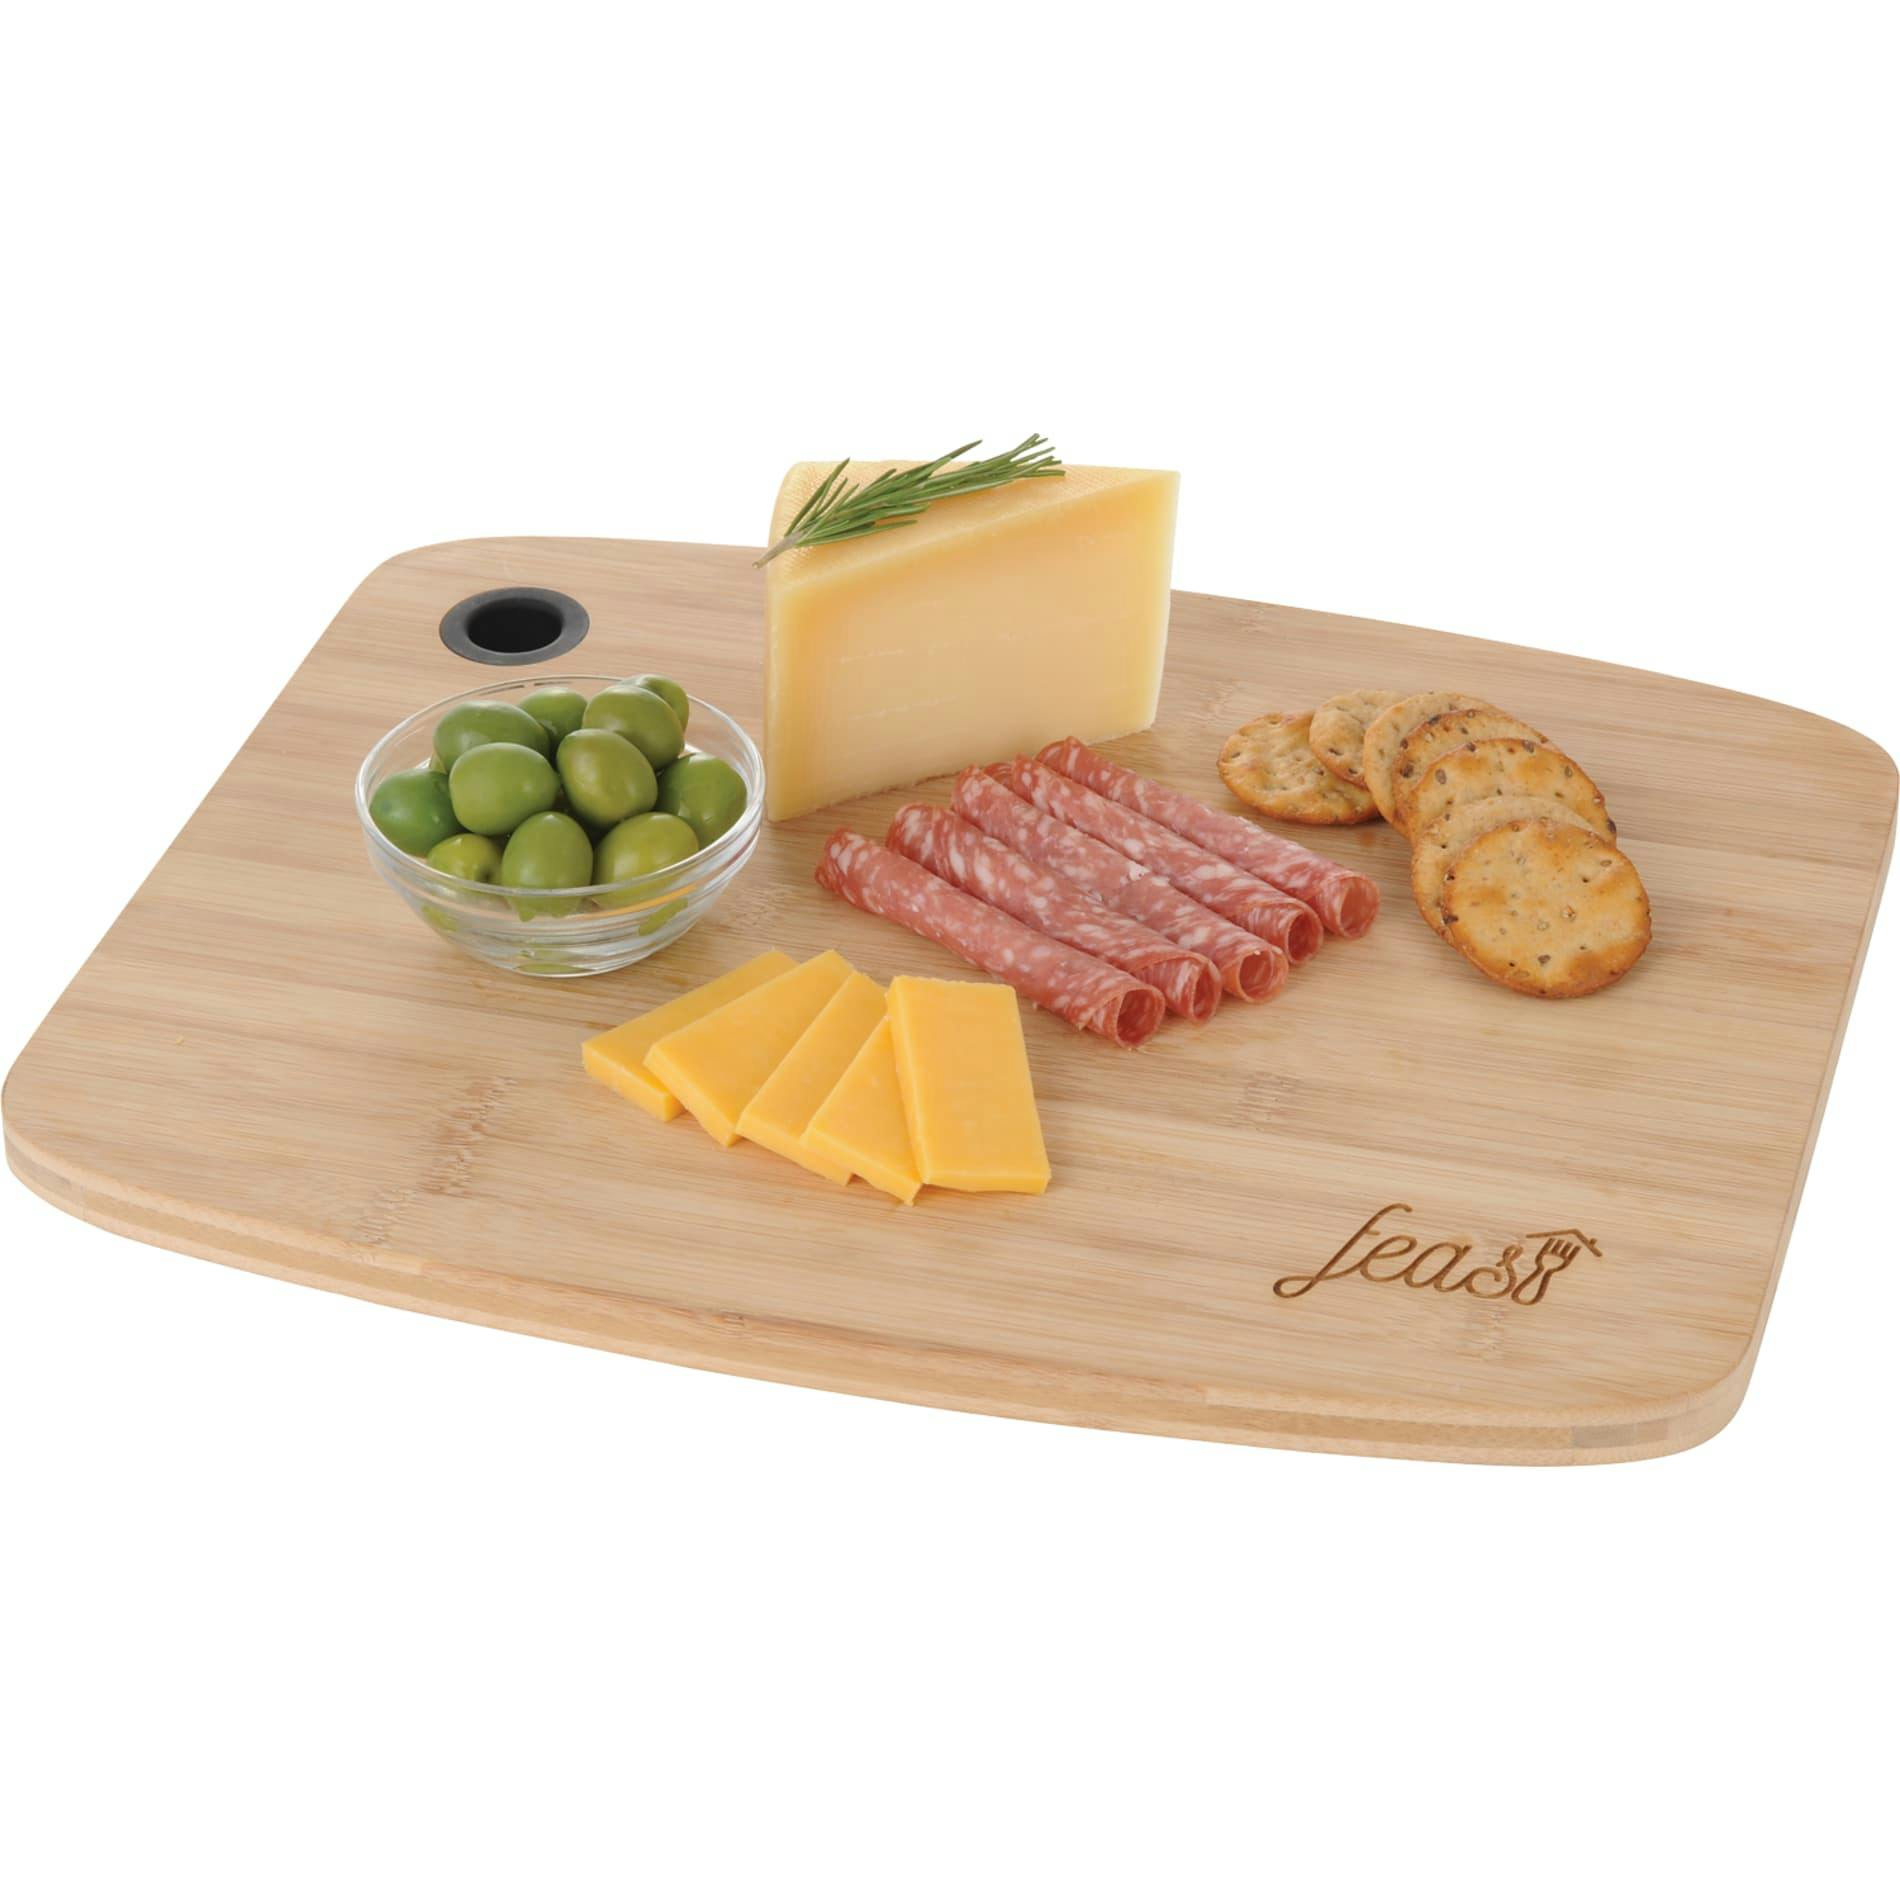 FSC Large Bamboo Cutting Board with Silicone Grip - additional Image 1